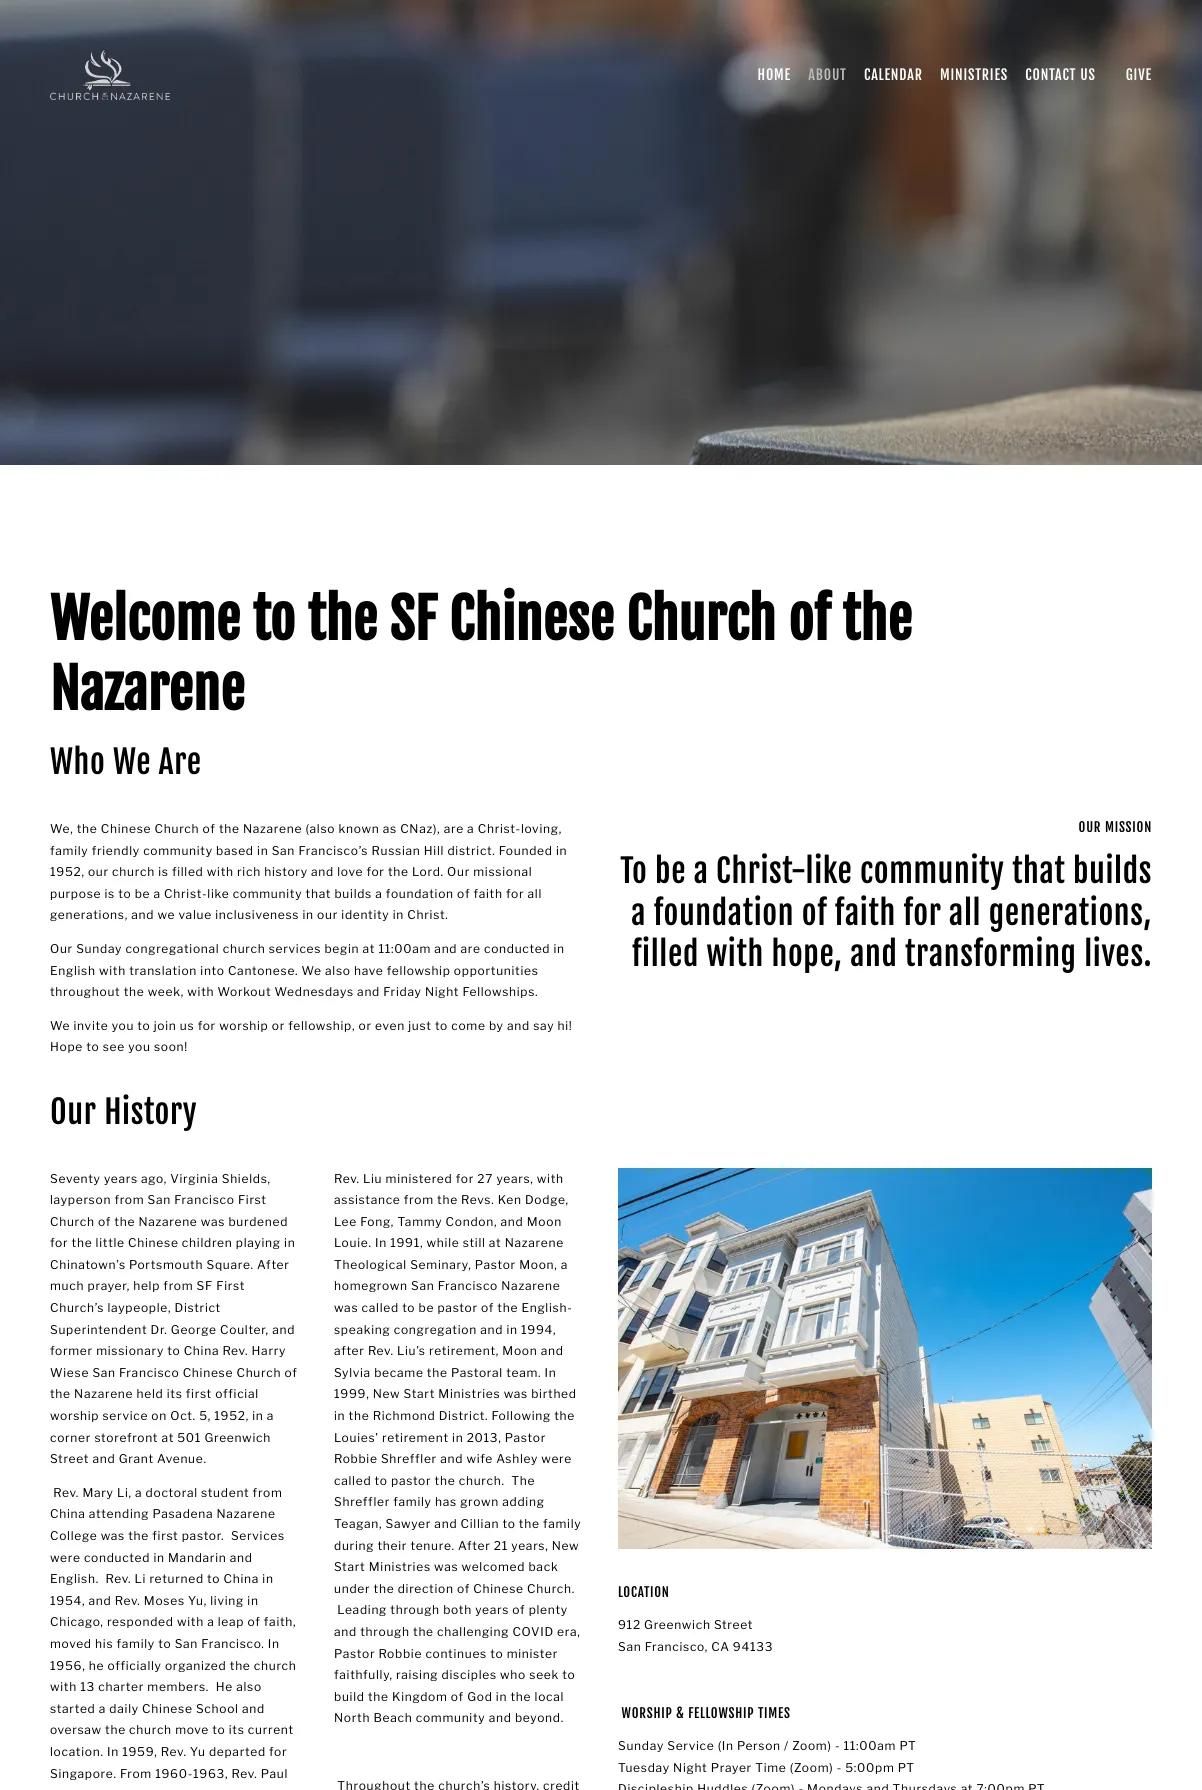 Screenshot 3 of San Francisco Chinese Church of the Nazarene (Example Squarespace Church Website)